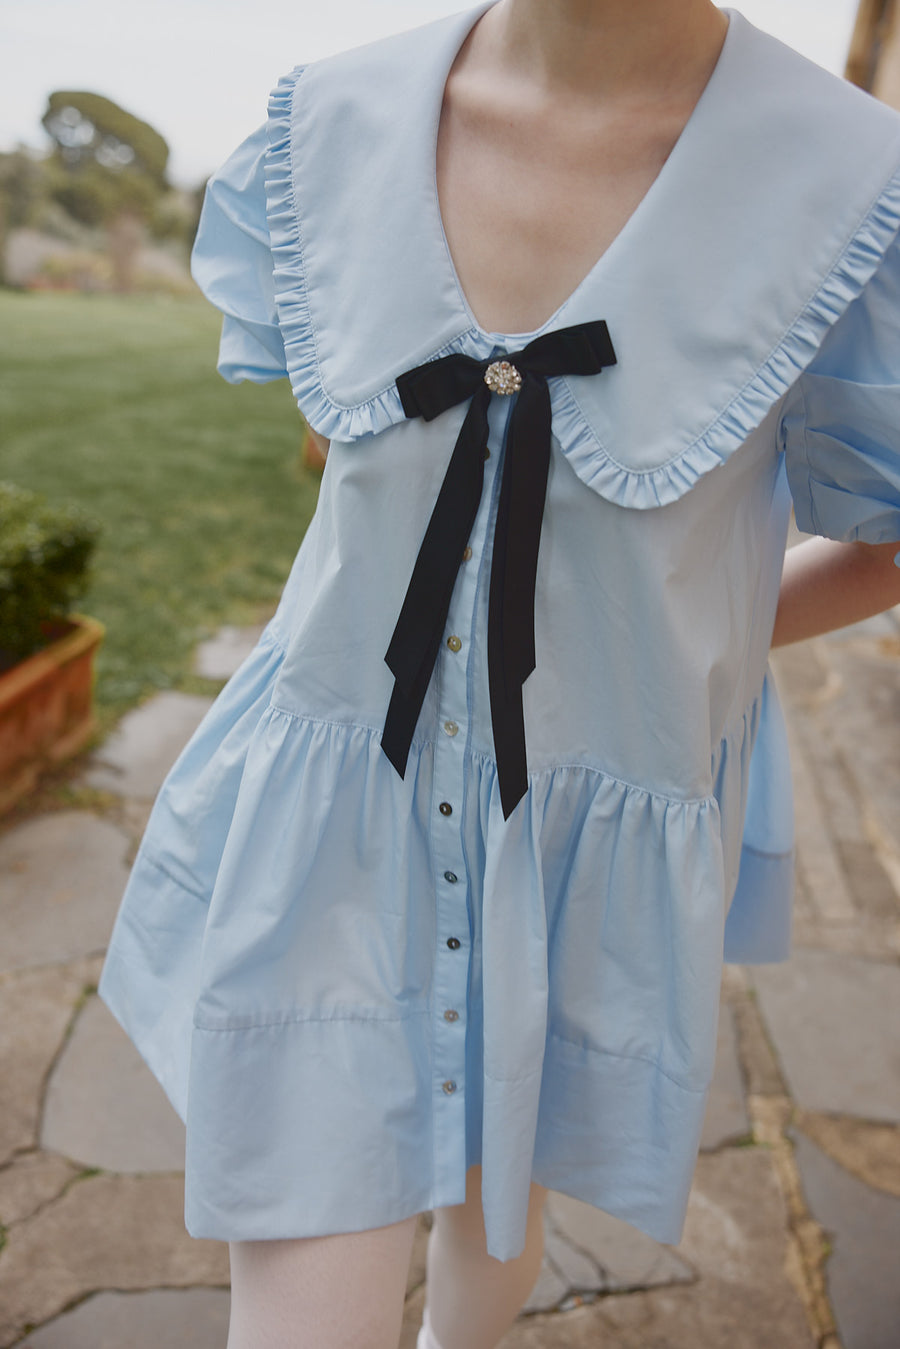 Ruffle Peter Pan collar on the Hazel Mini Dress in blue cotton shirting by House of Campbell.